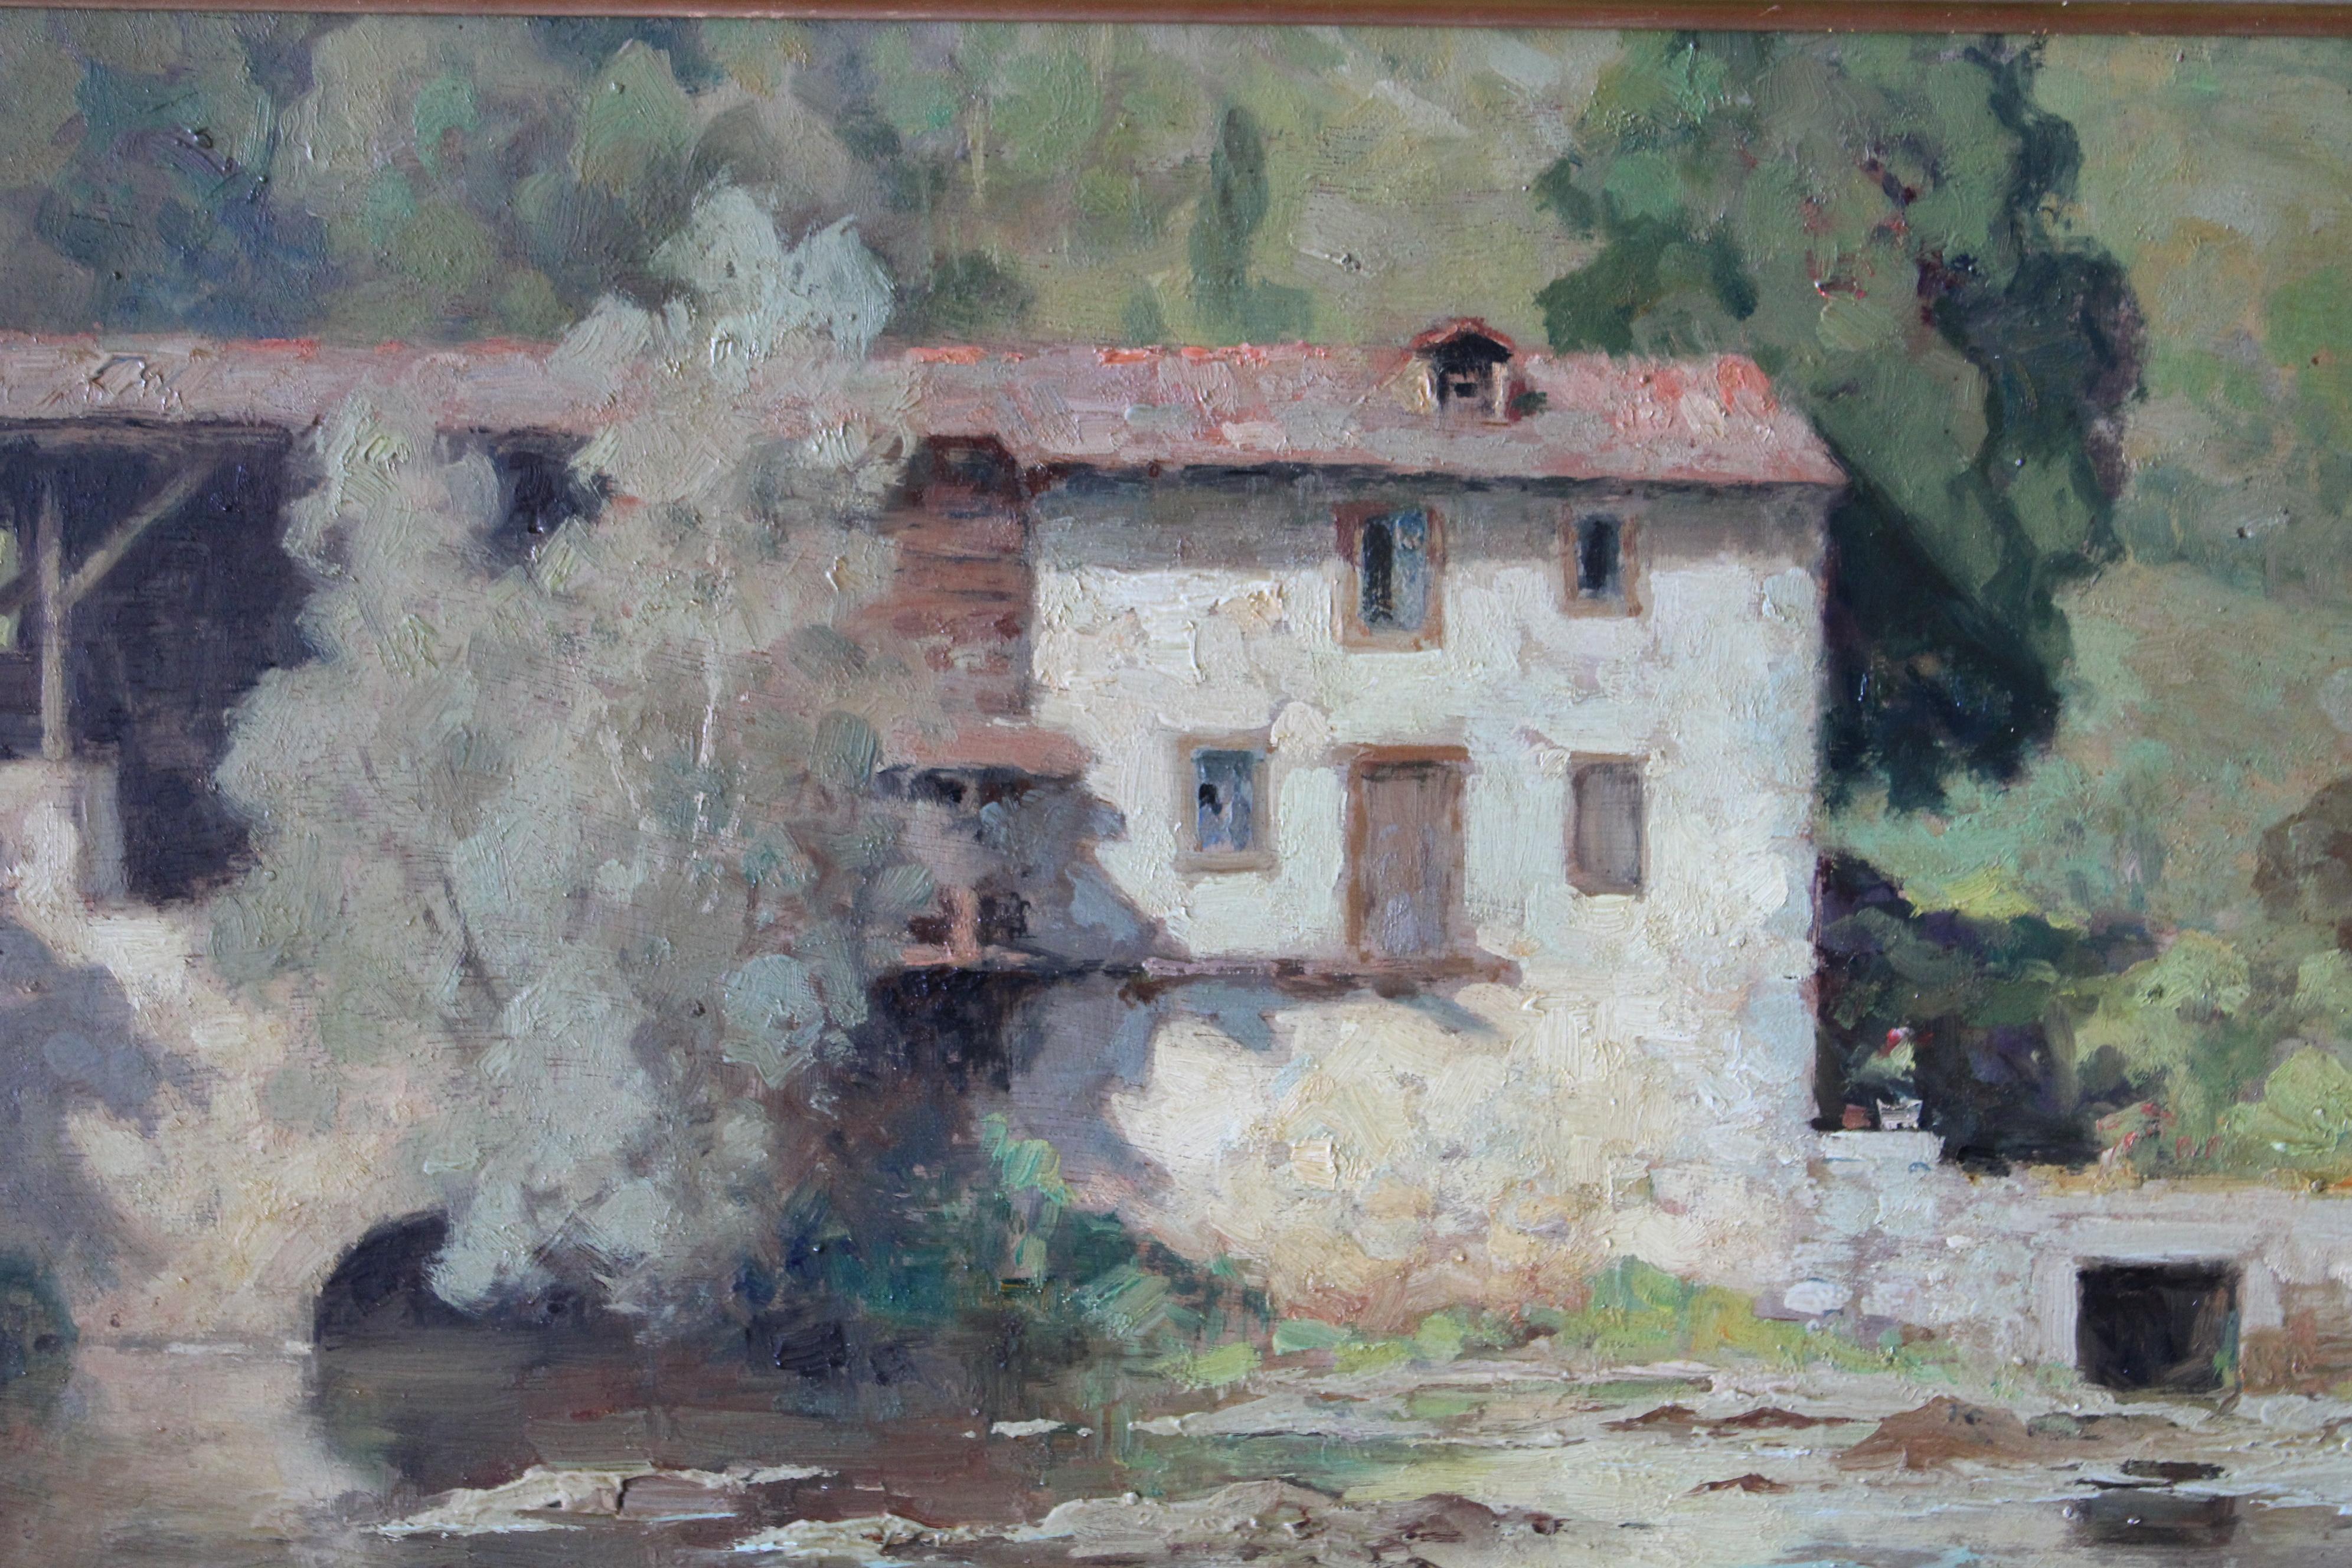 Vintage French Landscape oi painting, post-impressionist riverscape with mill - Post-Impressionist Painting by Albert Regagnon 